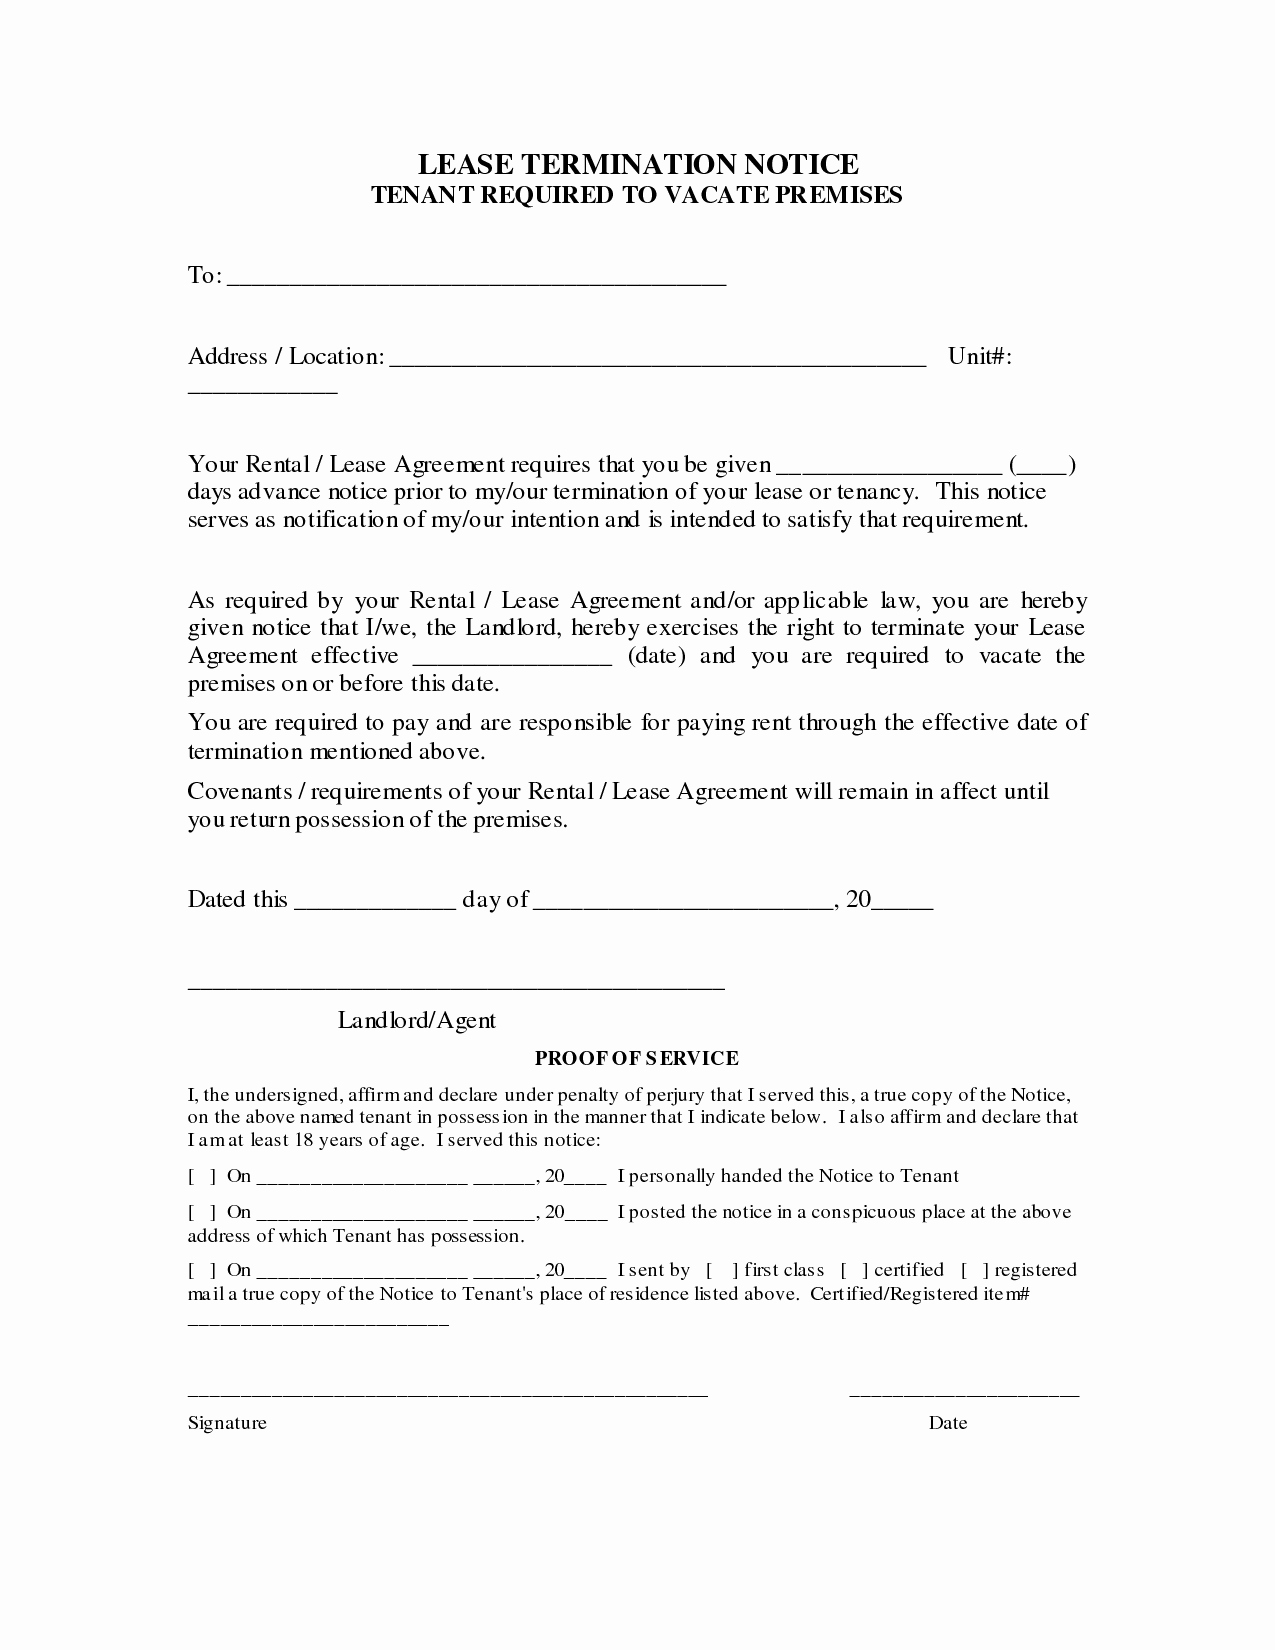 Termination Of Lease Agreement Template Lovely Rental Agreement Termination Letter Sample Lease From